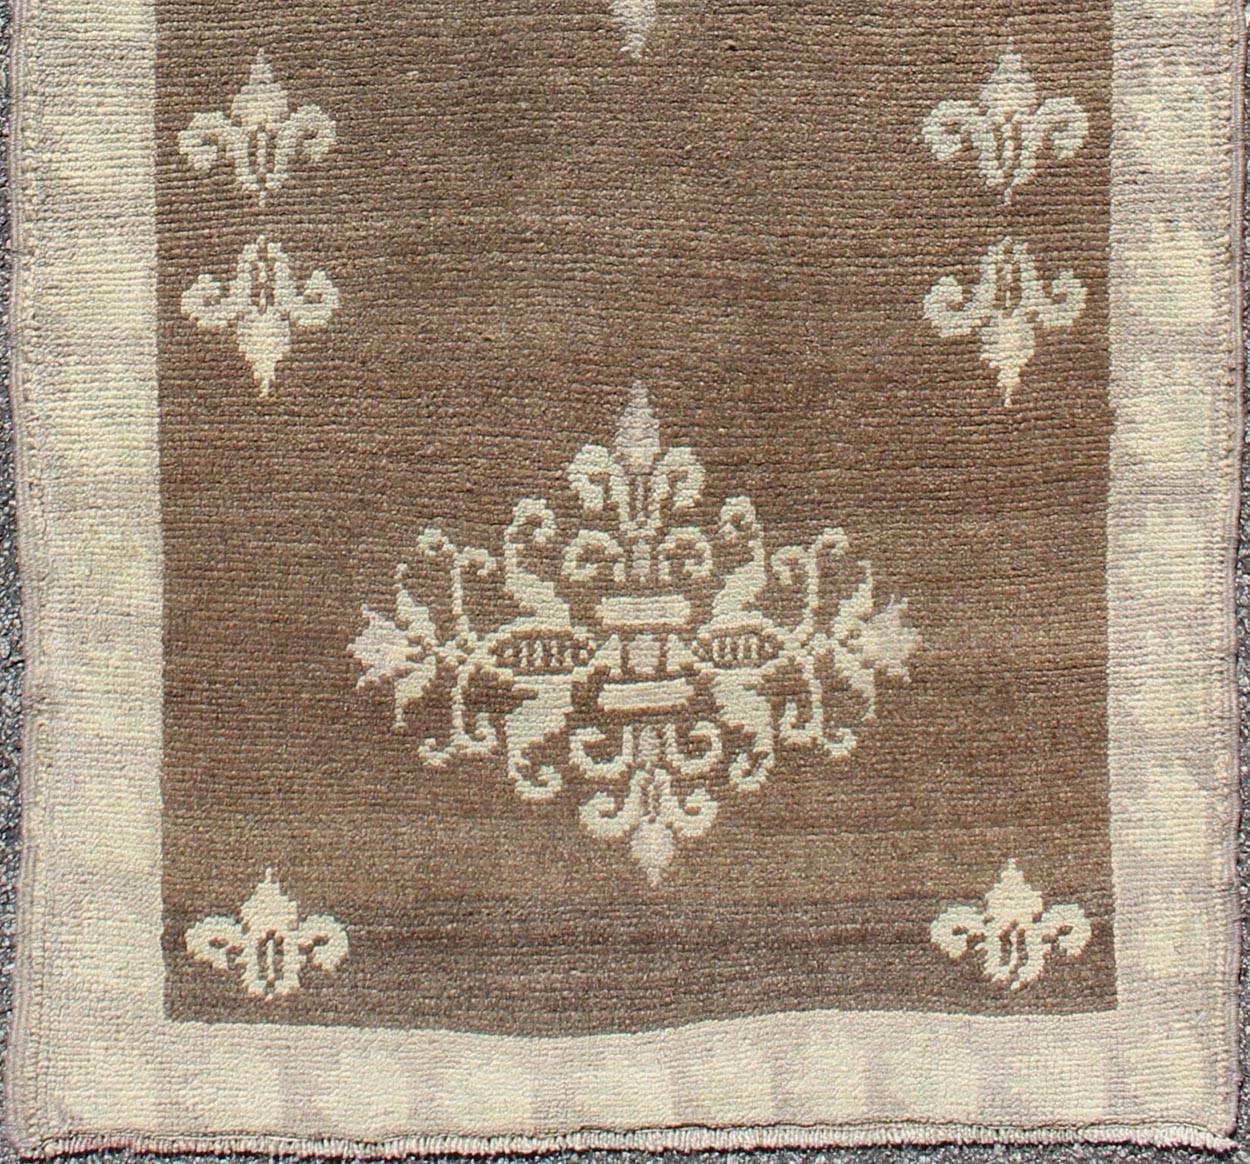 Brown midcentury Turkish Tulu runner with ivory blossoming medallions, rug en-112932, country of origin / type: Turkey / Tulu, circa mid-20th century.

This vintage Tulu runner contains three ivory blossoming medallions laid across a solid brown